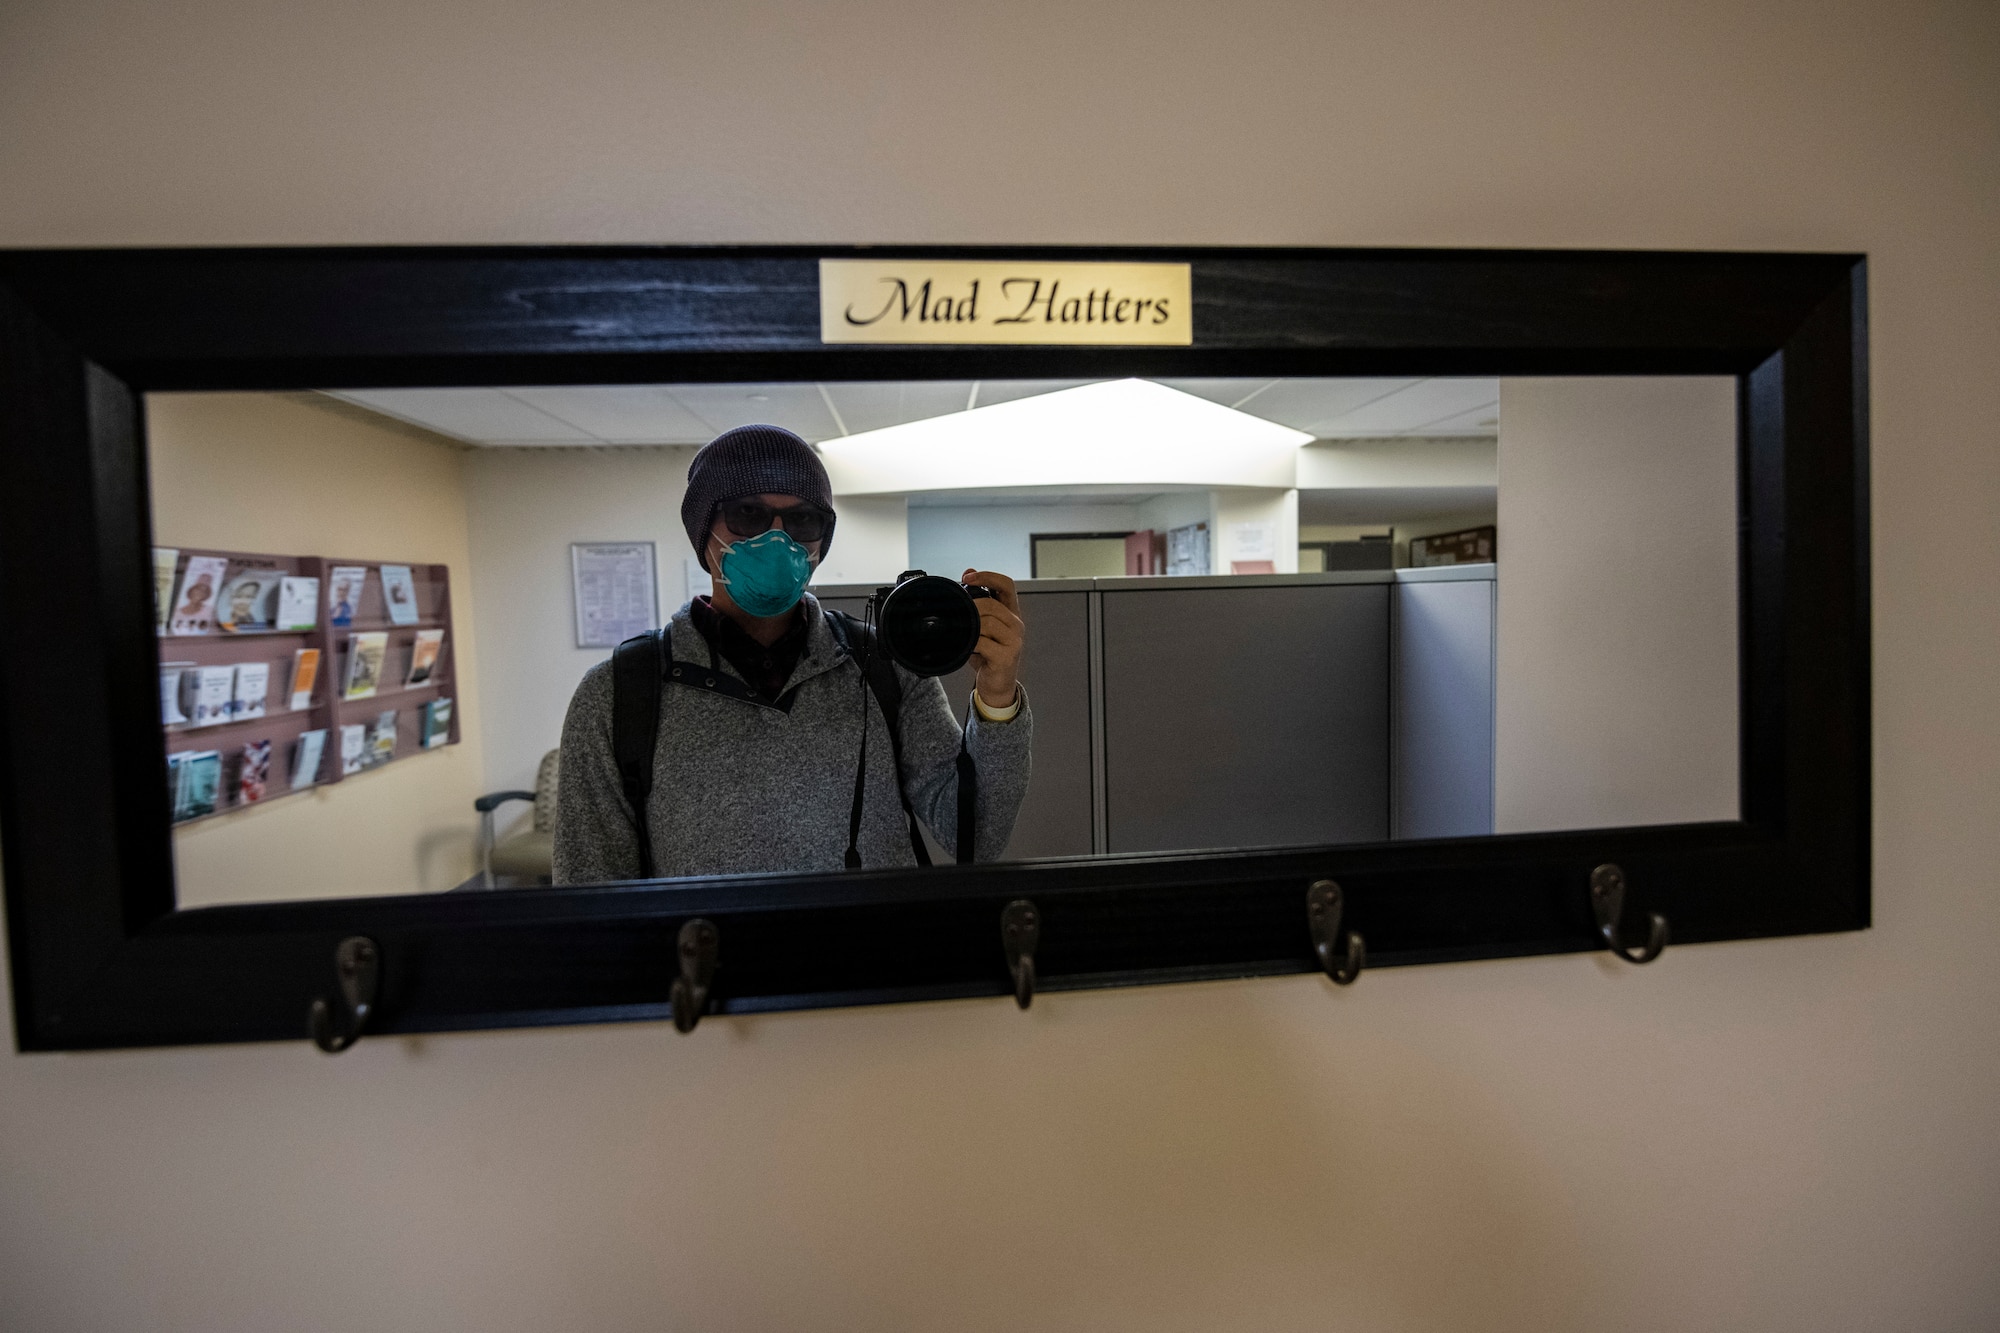 A man takes a picture of himself in a mirror in a medical center.